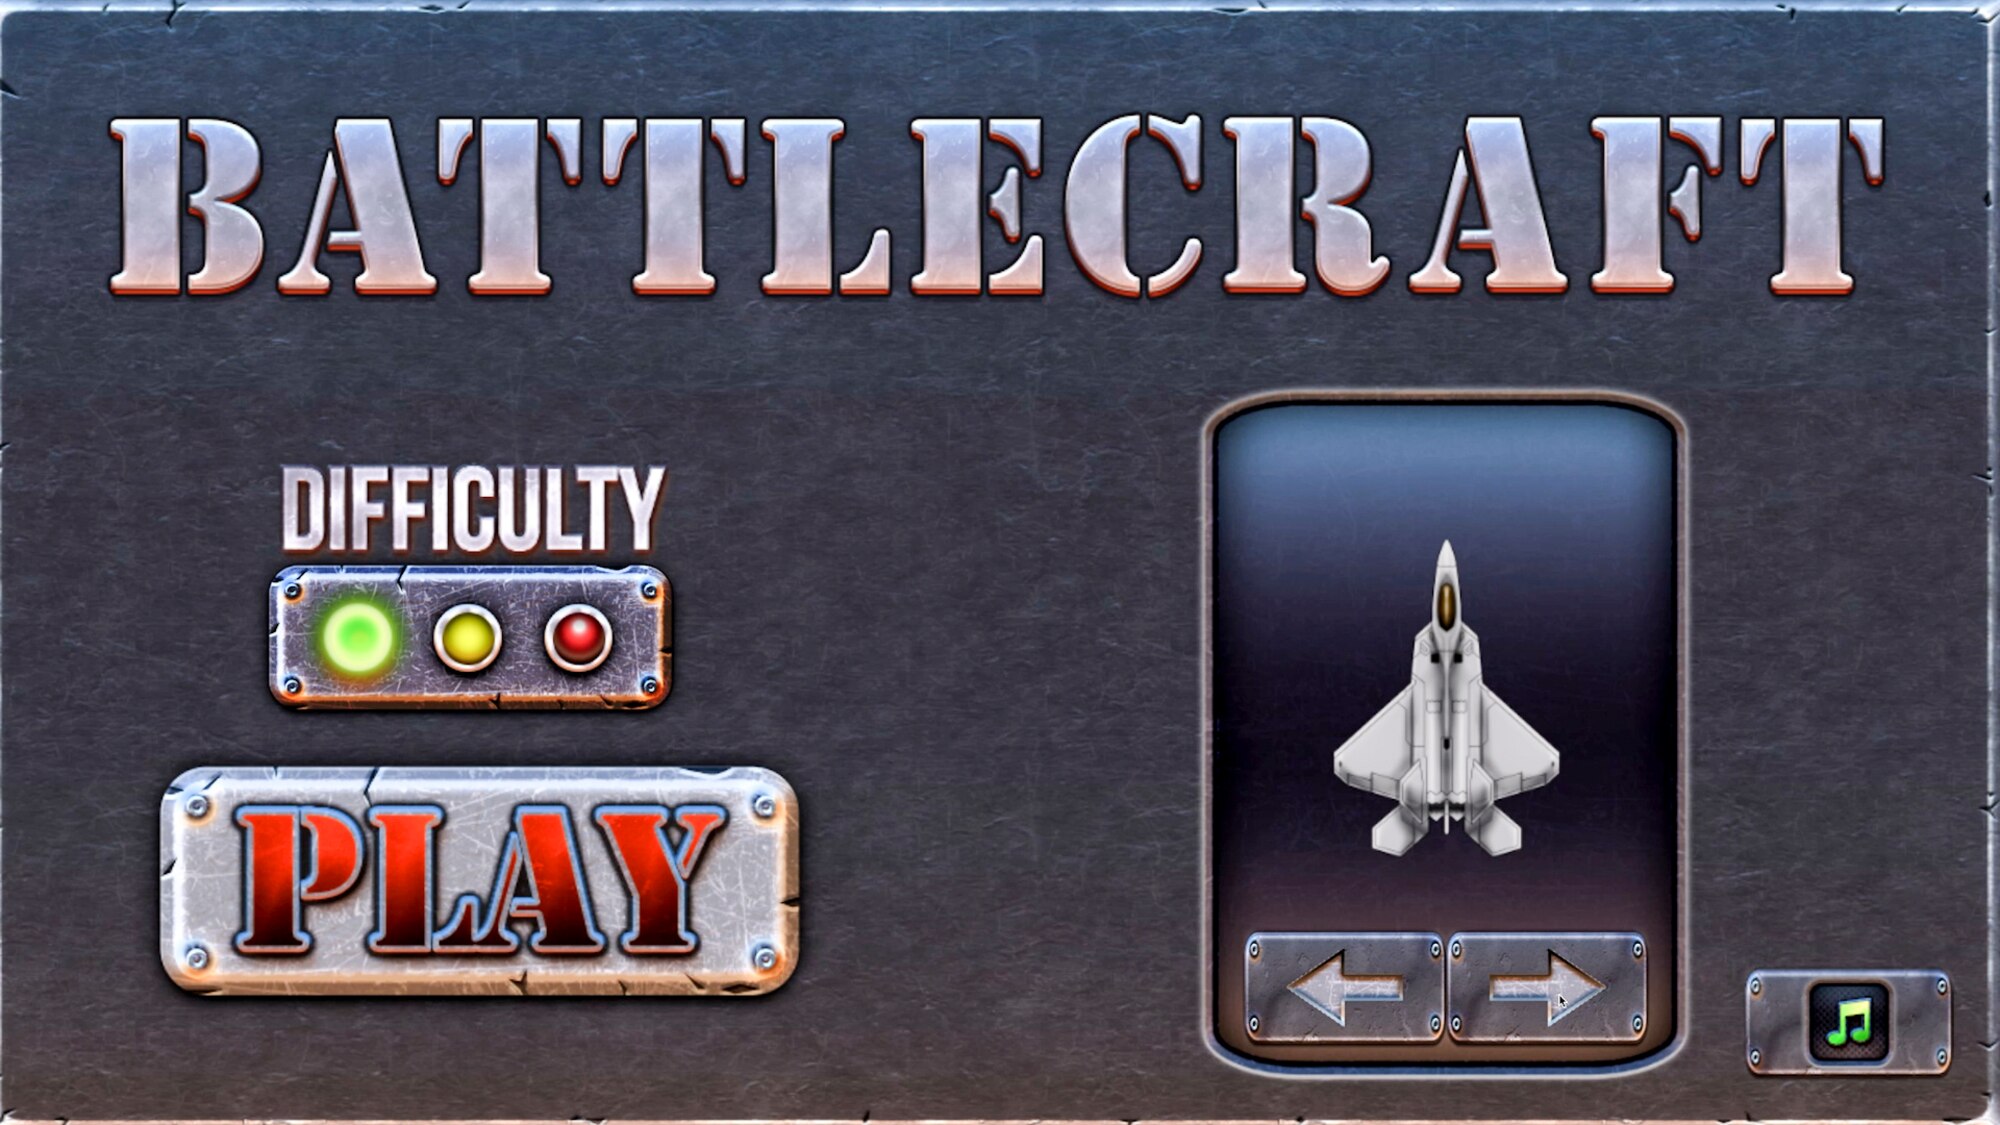 DoD Starbase Edwards has created the very first interactive mobile video game starring Edwards Air Force Base. "Battlecraft" inspired by the popular video game "Battleship" was created to teach kids about science, math, engineering and technology with a fun interactive experience.